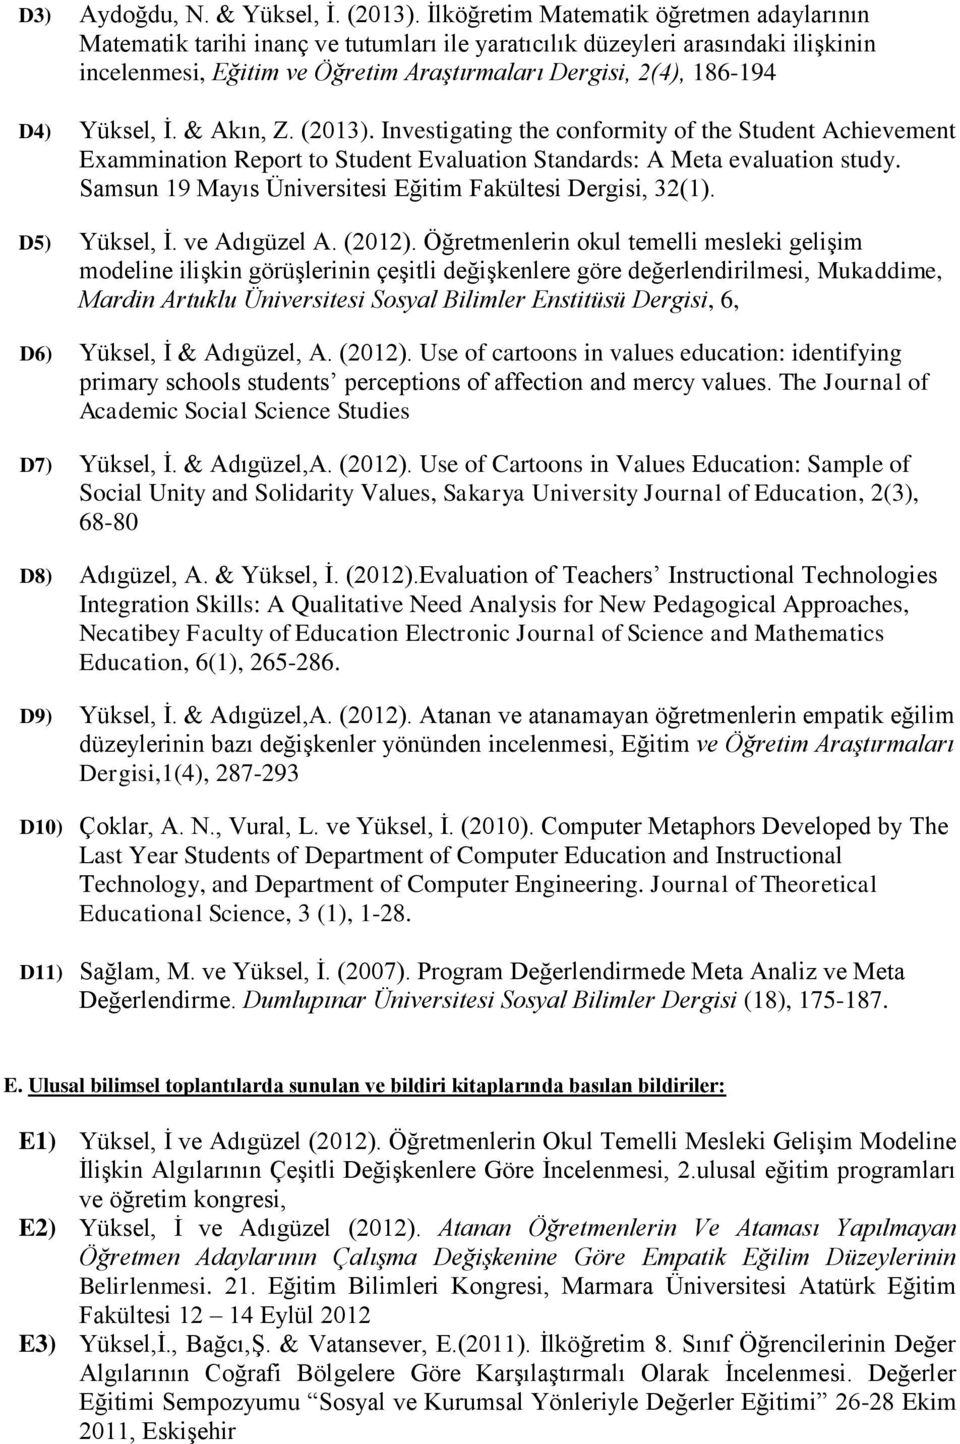 Yüksel, İ. & Akın, Z. (2013). Investigating the conformity of the Student Achievement Exammination Report to Student Evaluation Standards: A Meta evaluation study.